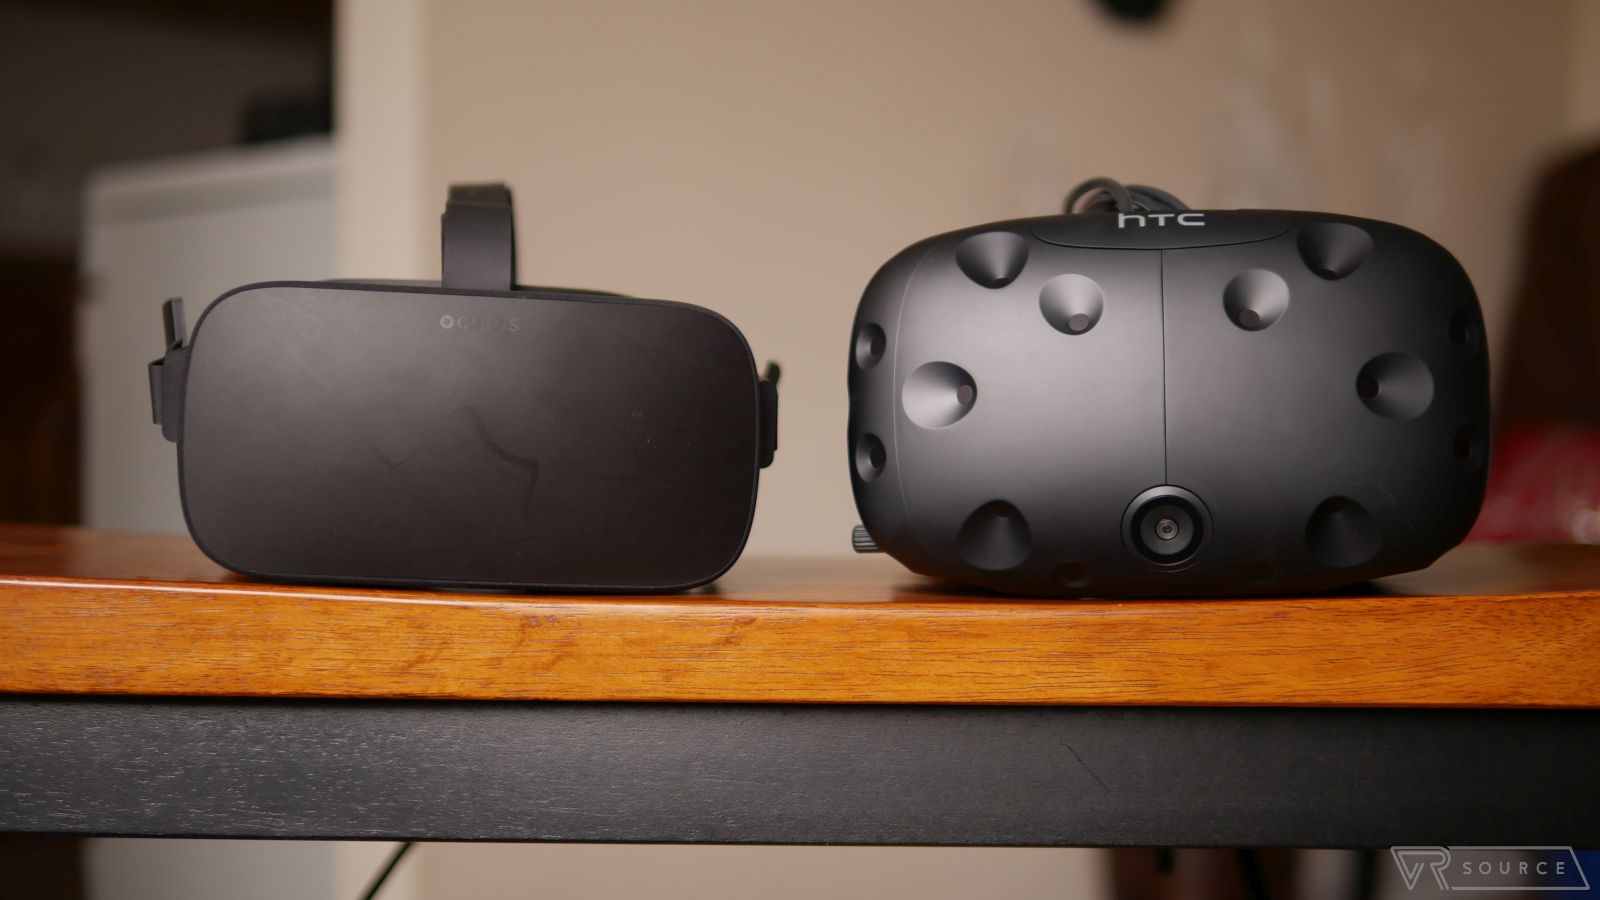 The Vive and Rift represent the two best known VR devices currently on the market.